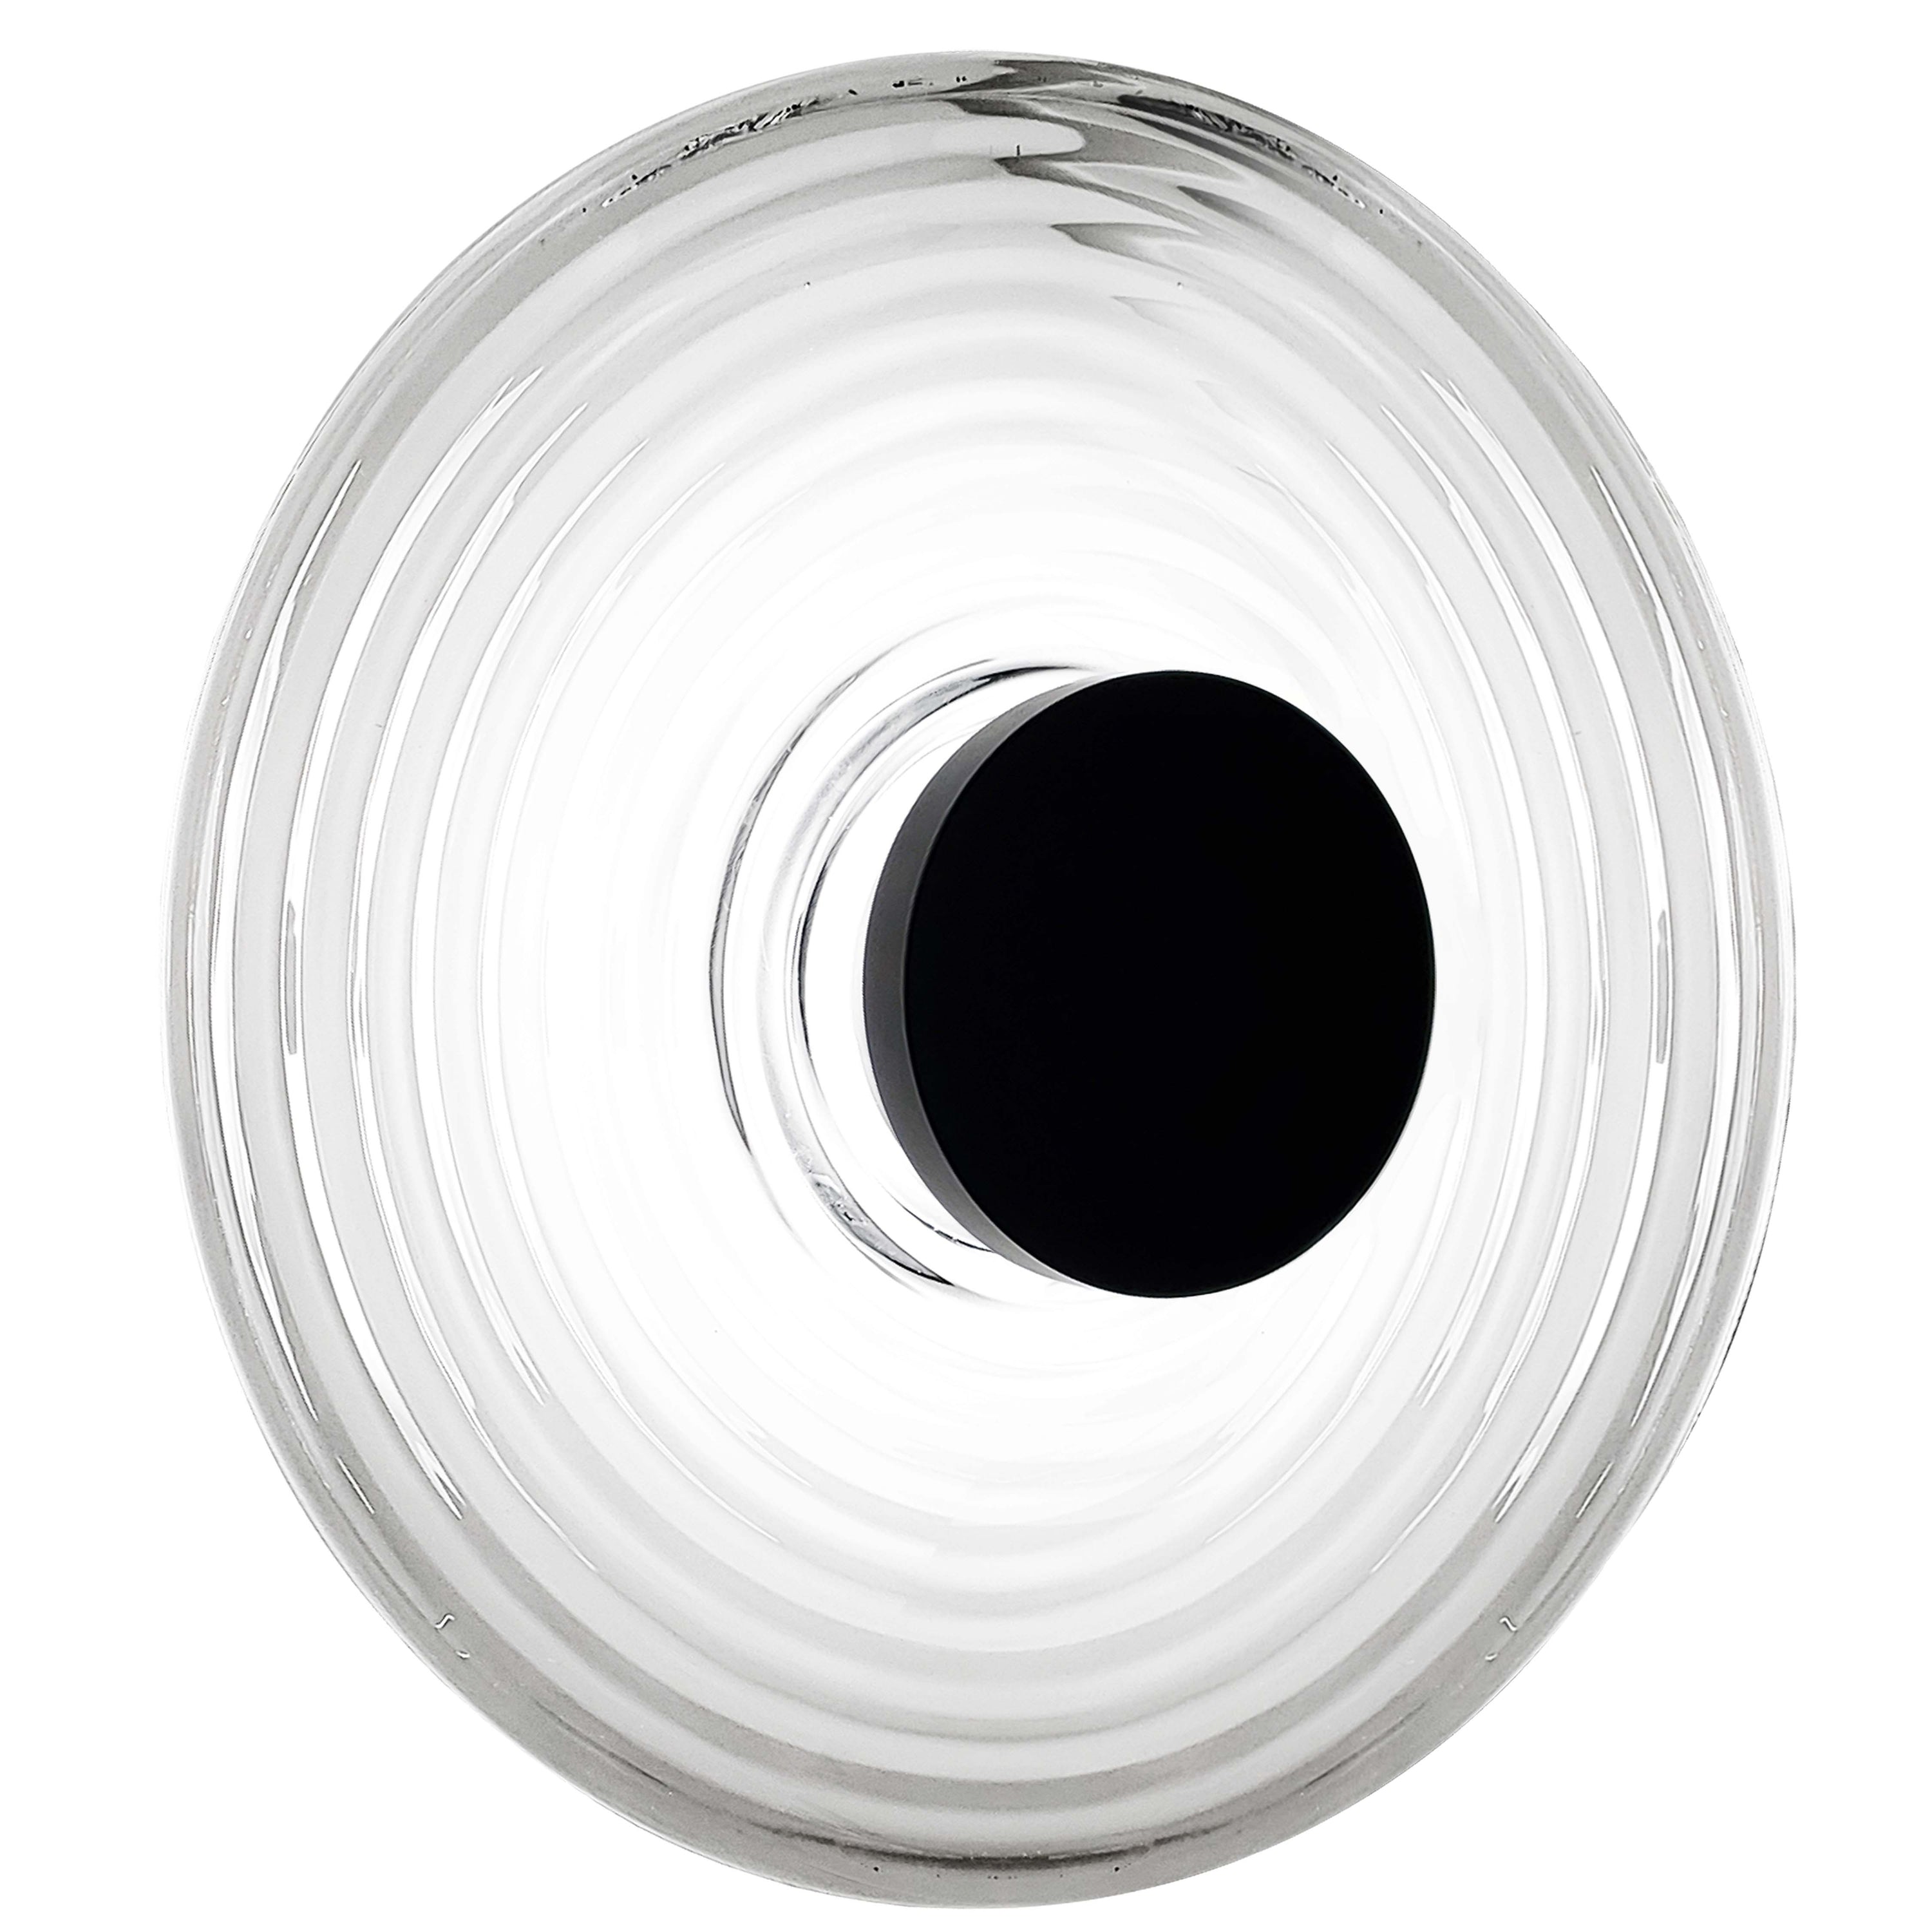 Dainolite WFD-1812LEDW-MB-CLR 12W Wall Sconce Matte Black with Clear Rippled Glass